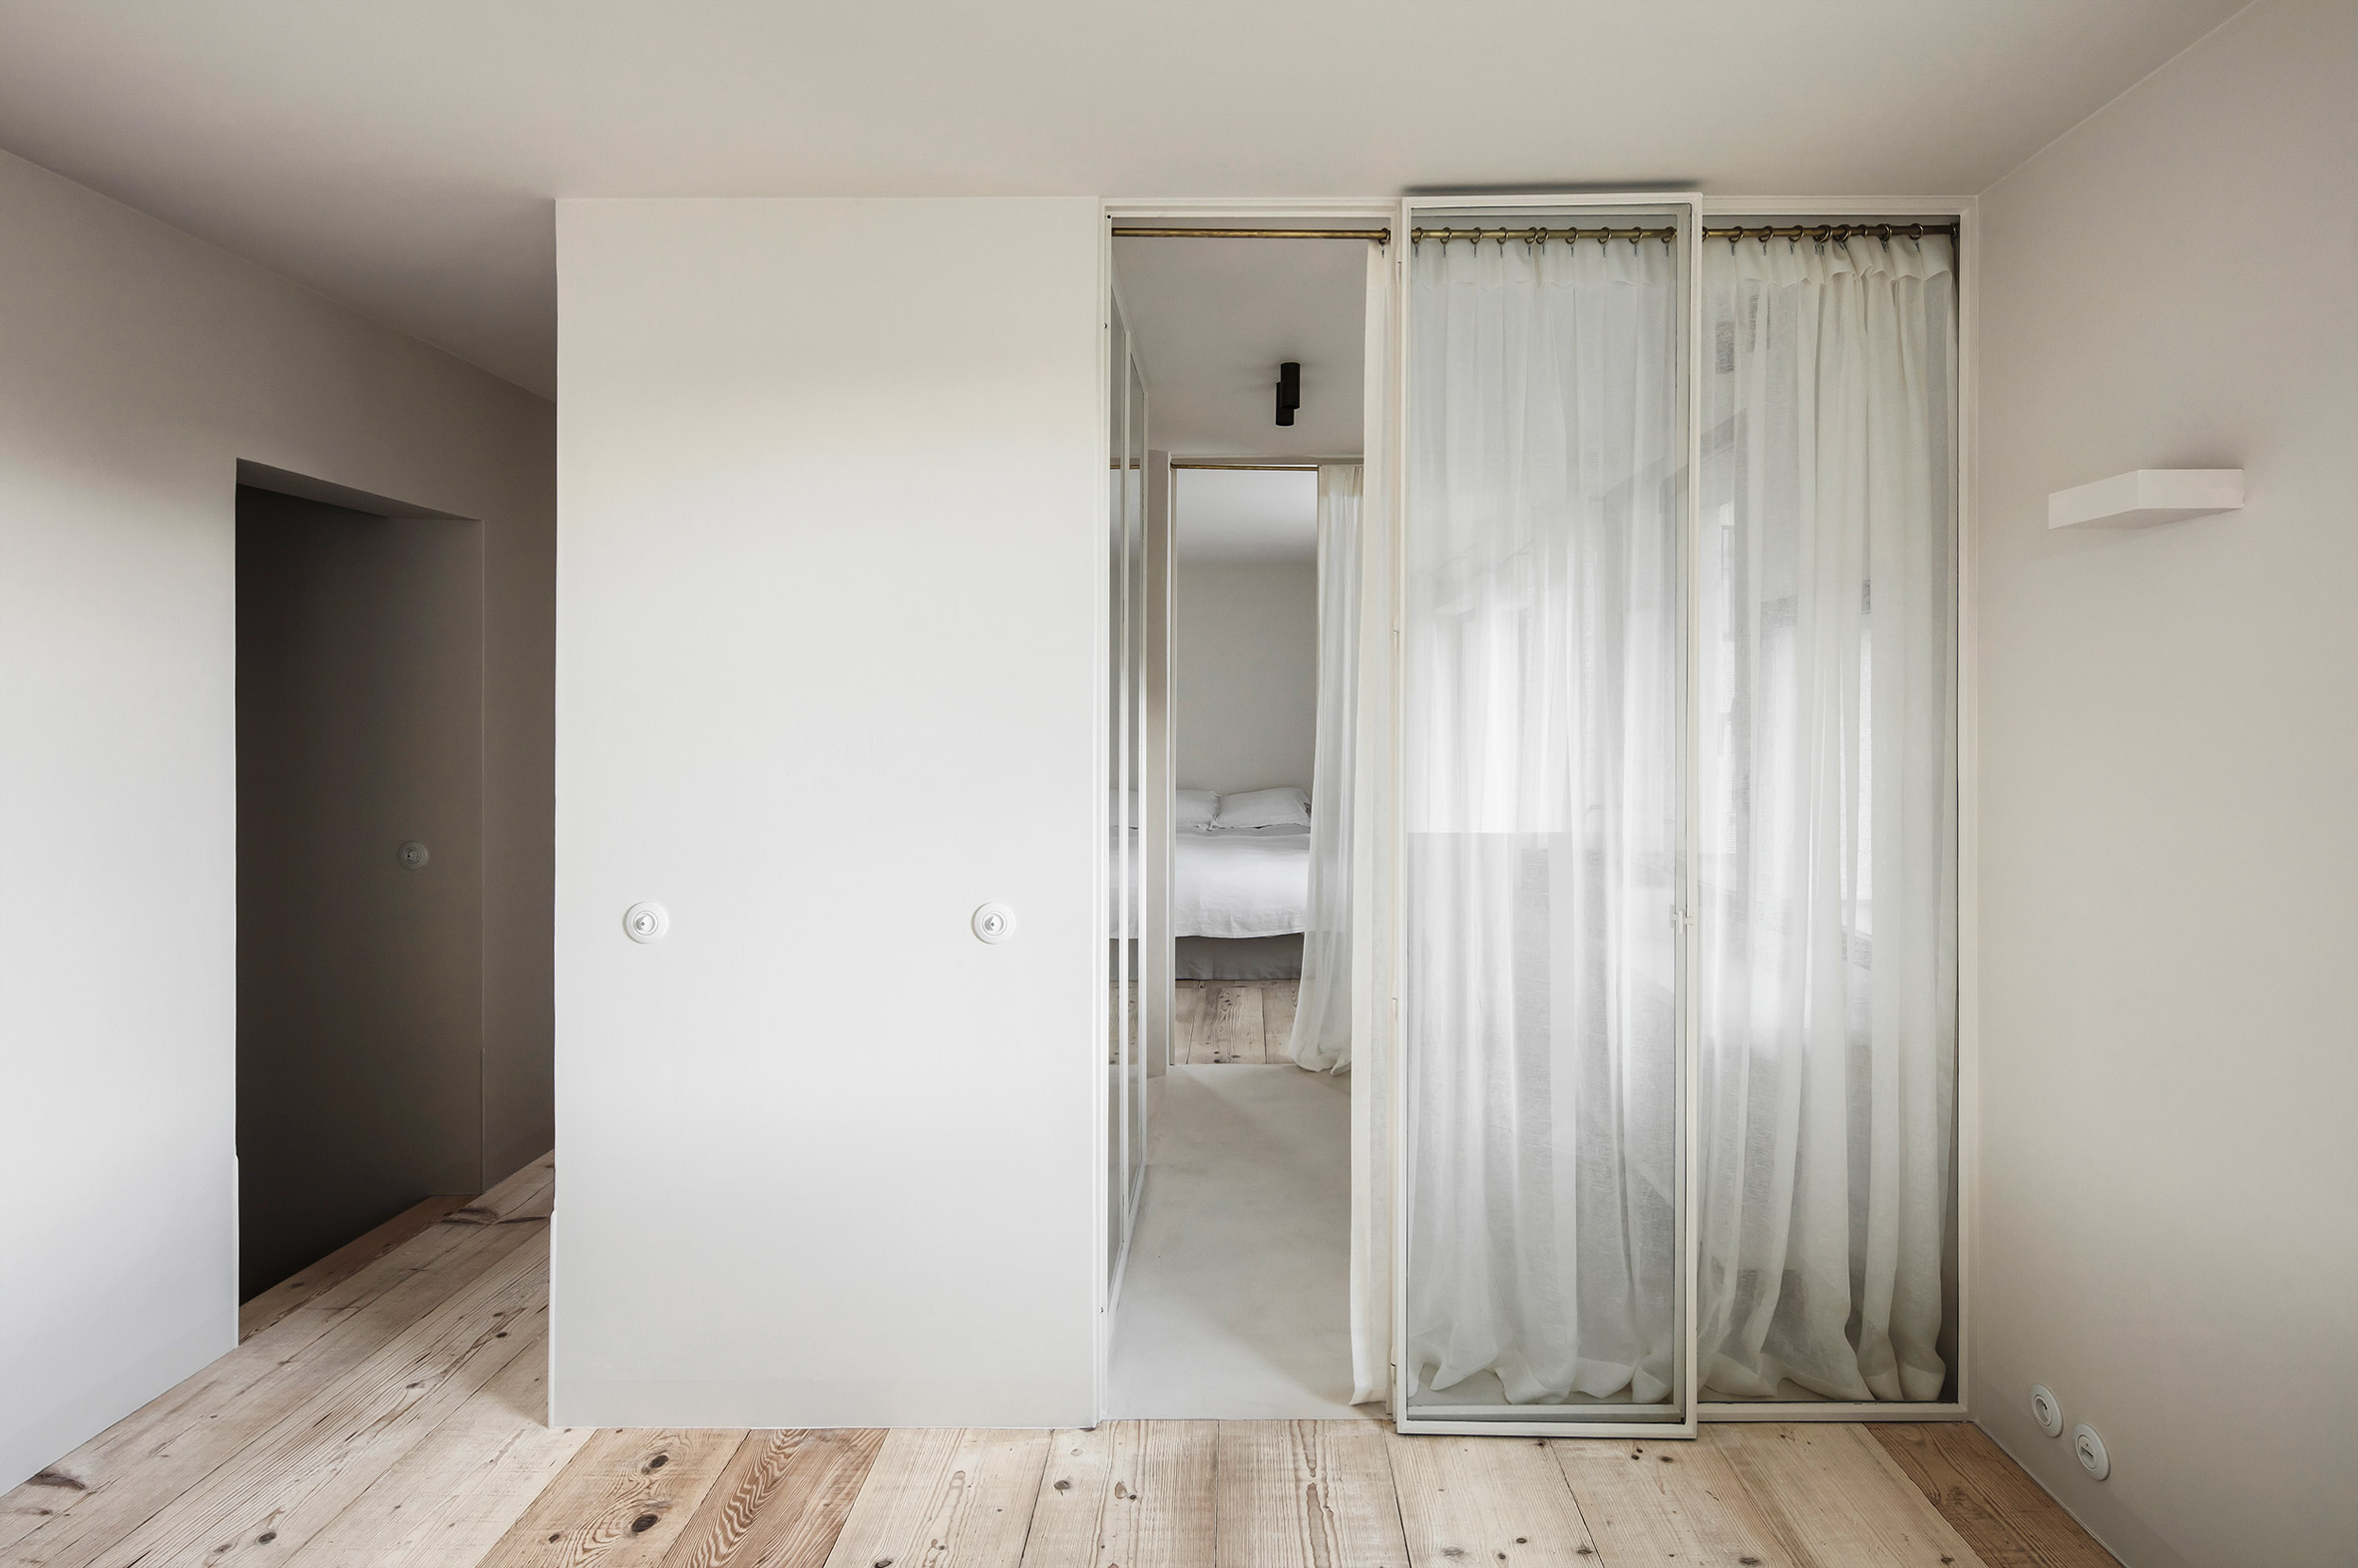 The apartment designed by interior architect Arjaan De Feyter is located within one of four new-build blocks called The Cube, which were developed by Brussels-based architecture firm Bogdan & Van Broeck.